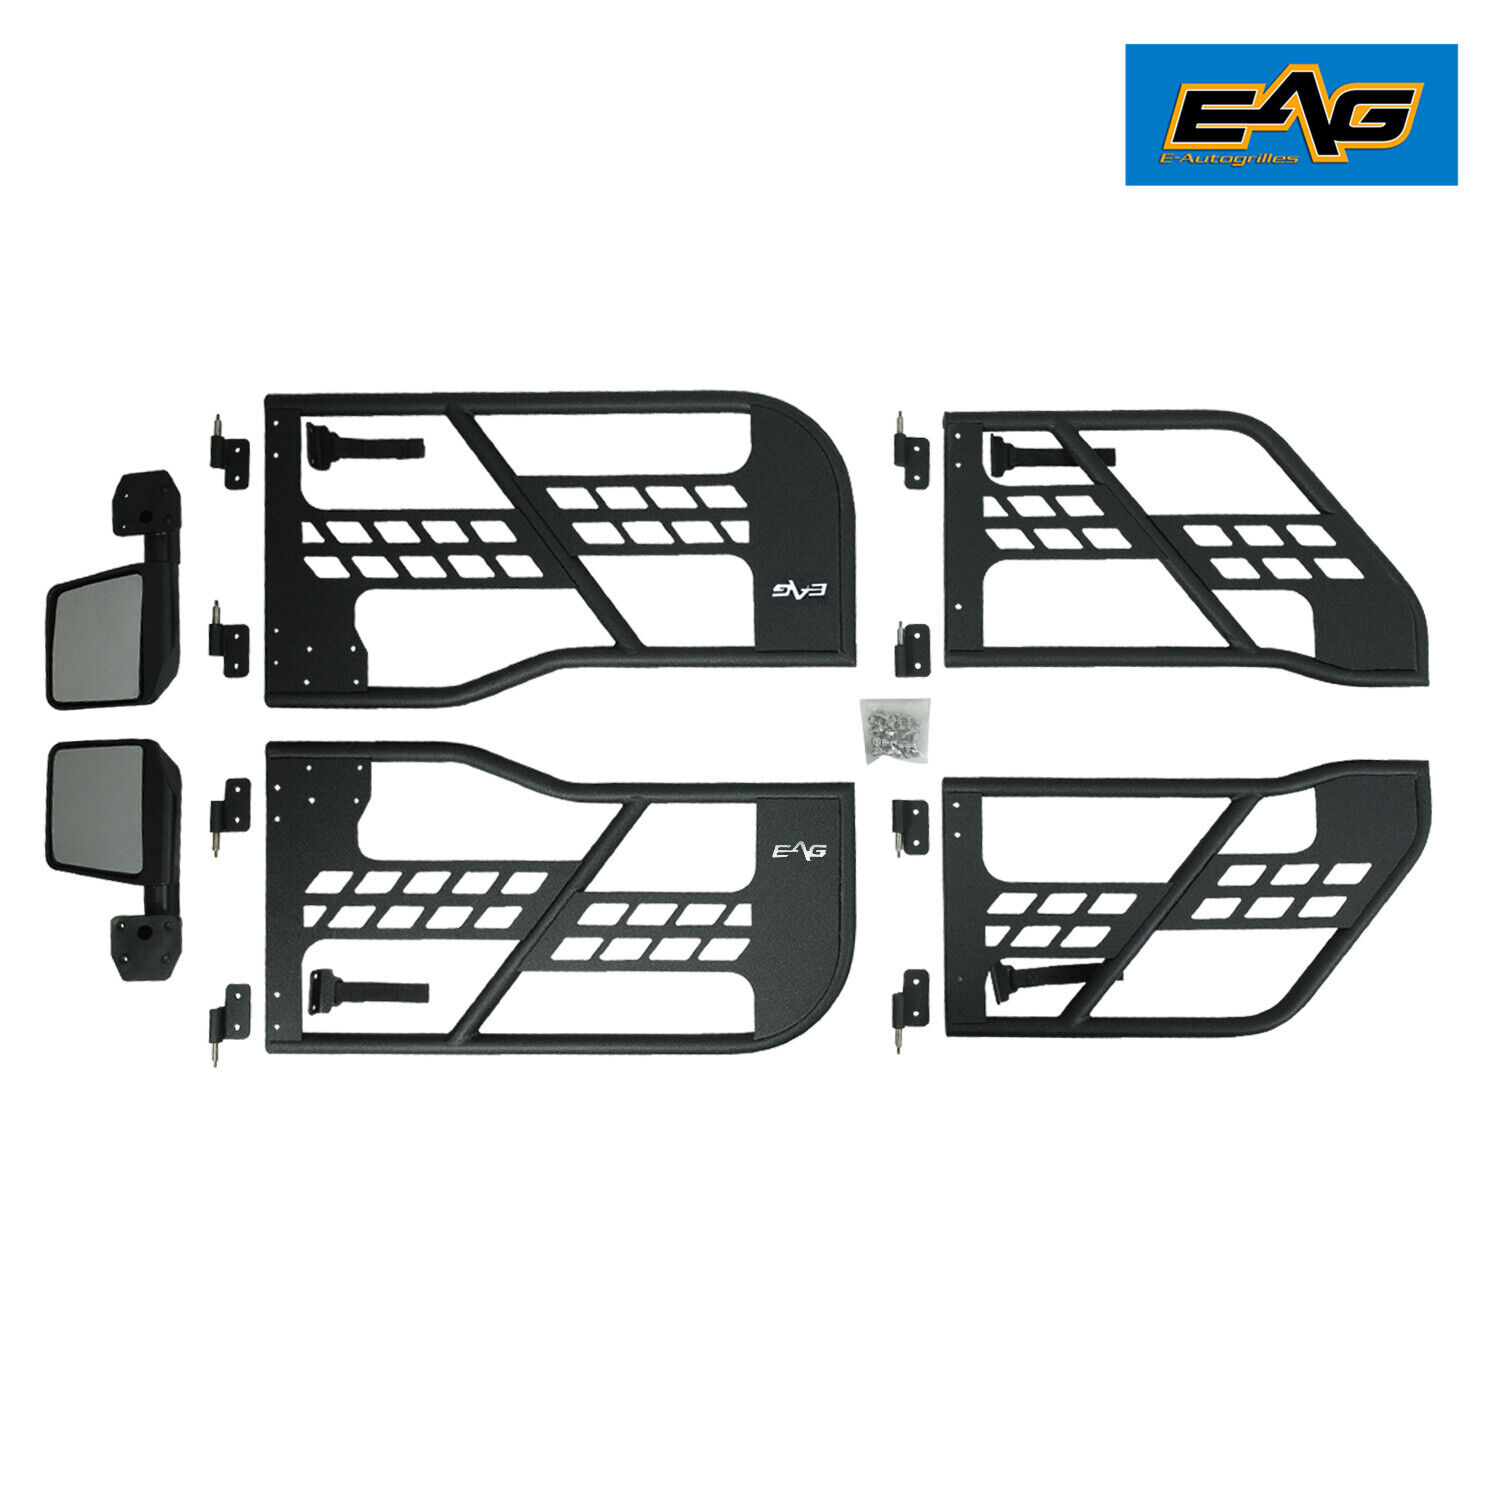 EAG Safari Replacement Tube Door with Mirror Fit for 07-18 Jeep Wrangler JK 4 Dr